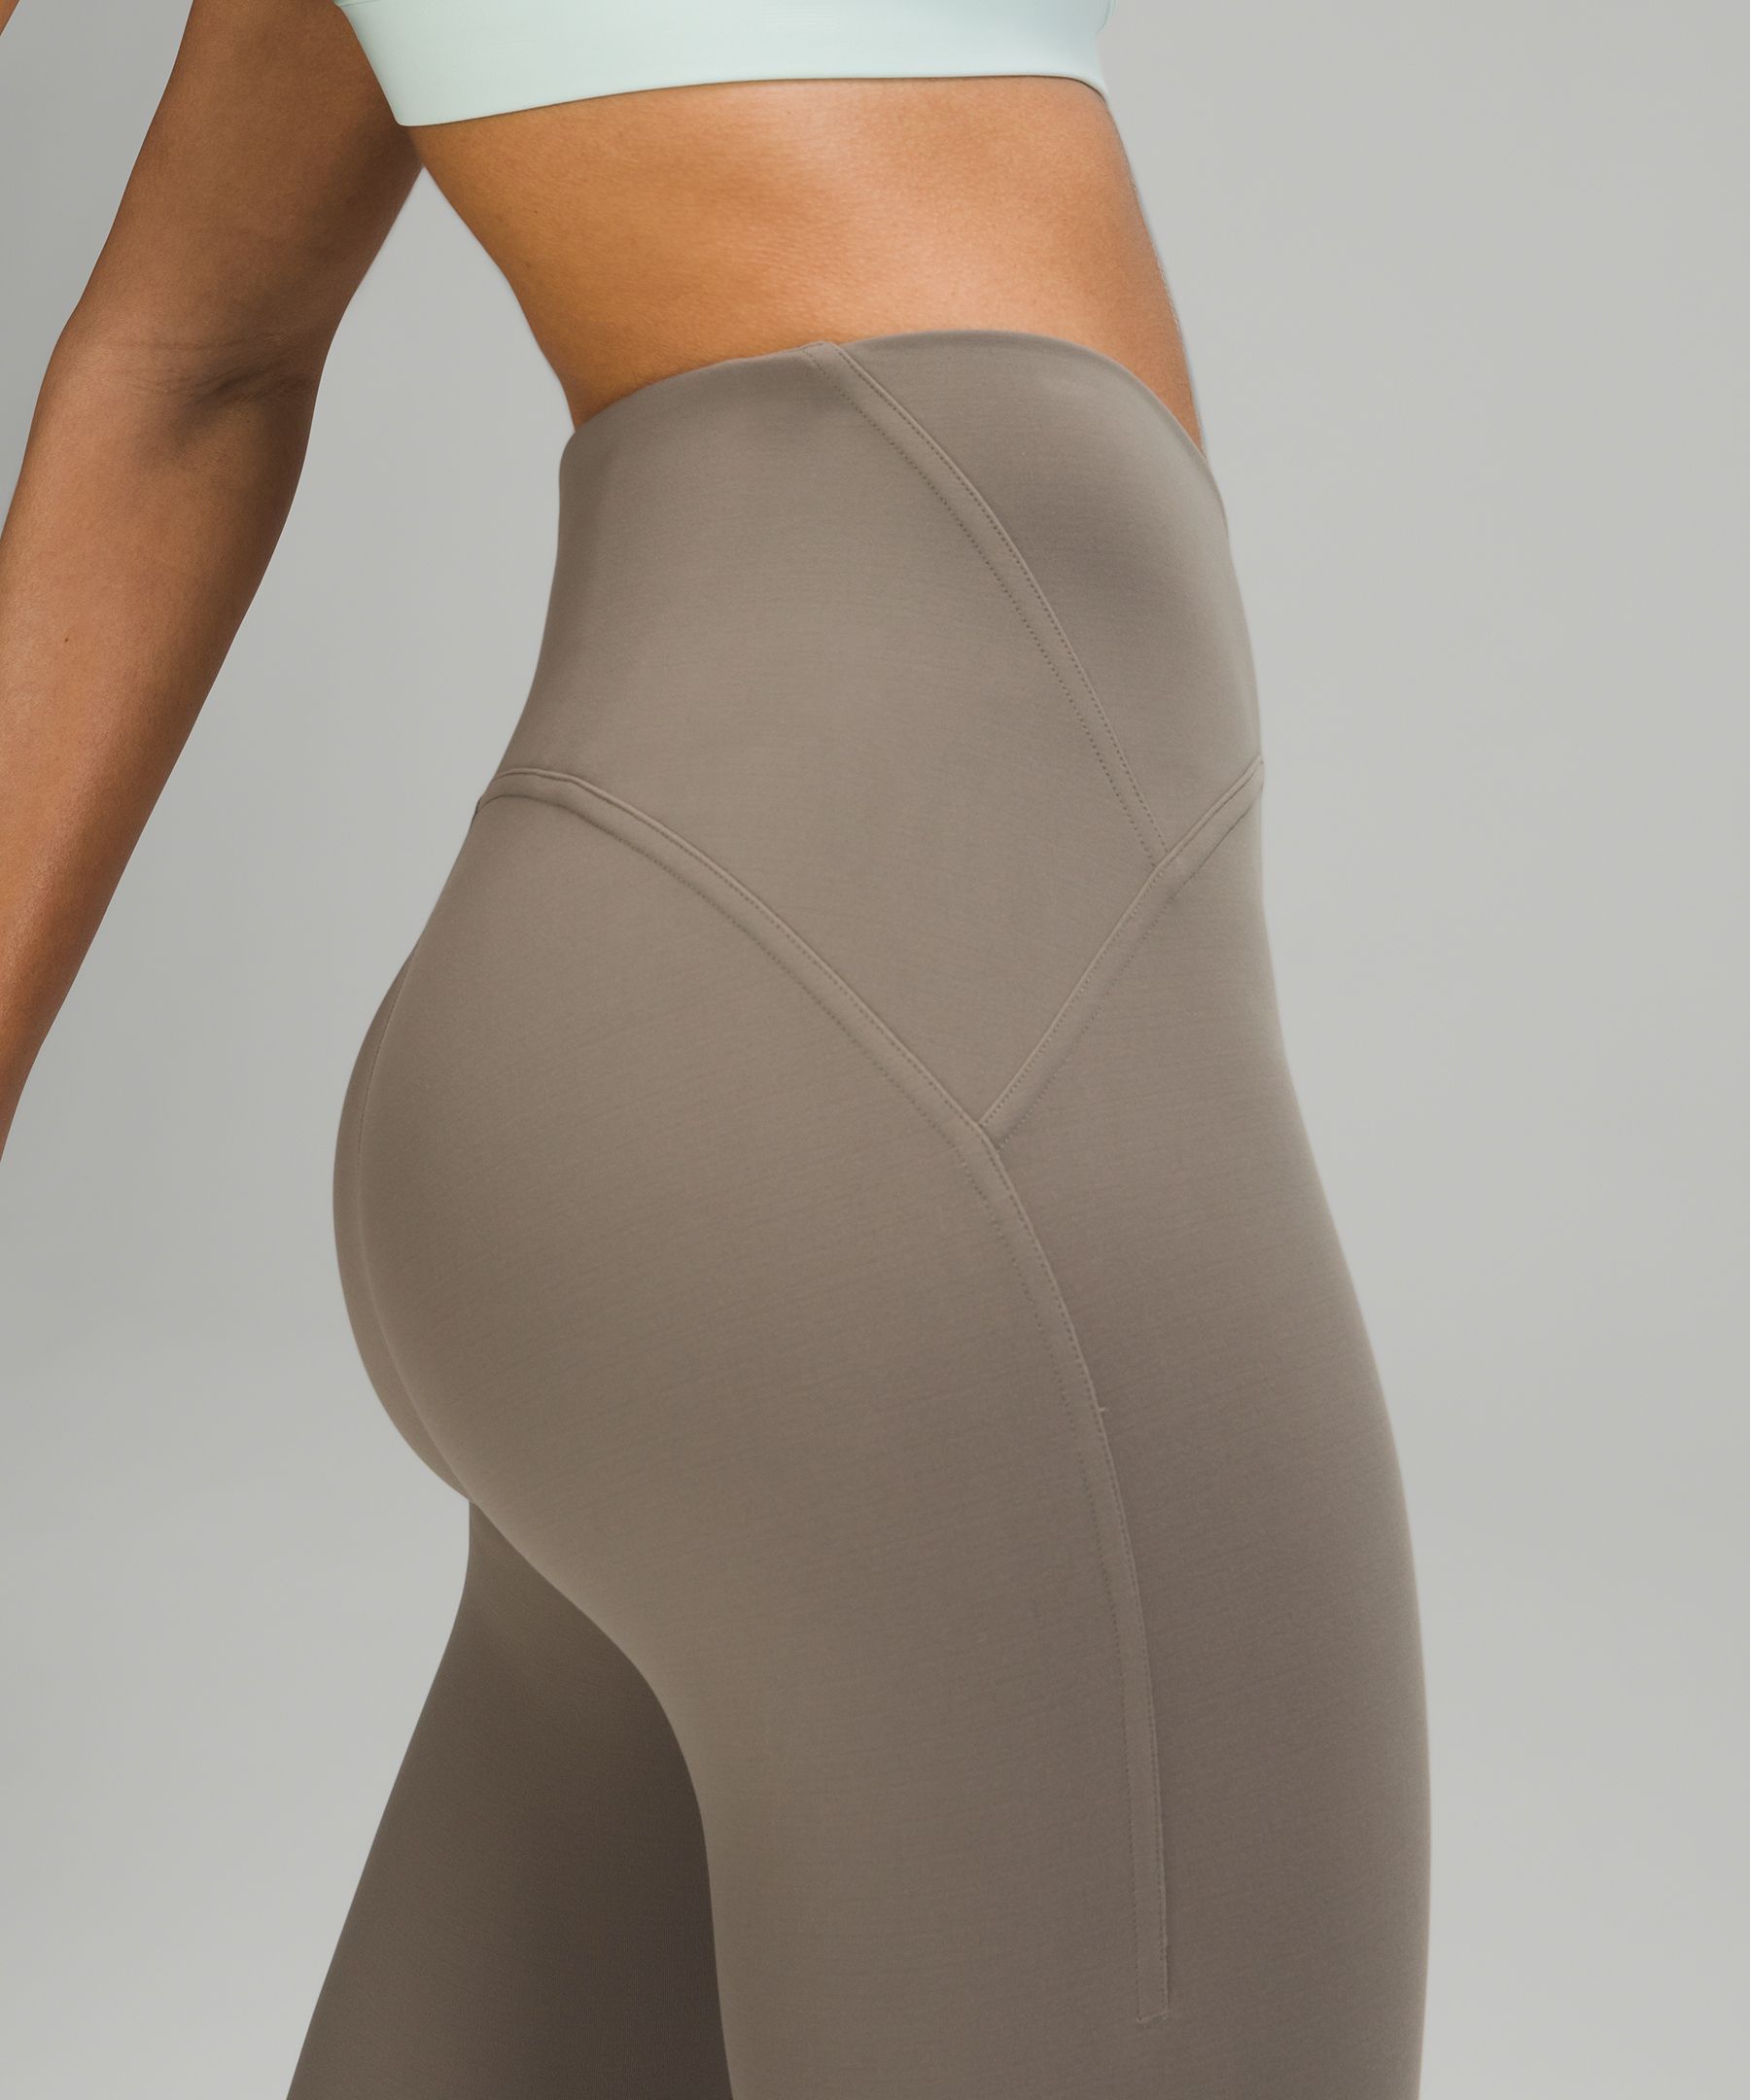 Is Lululemon Discontinuing Instill Leggings? Here's What You Need